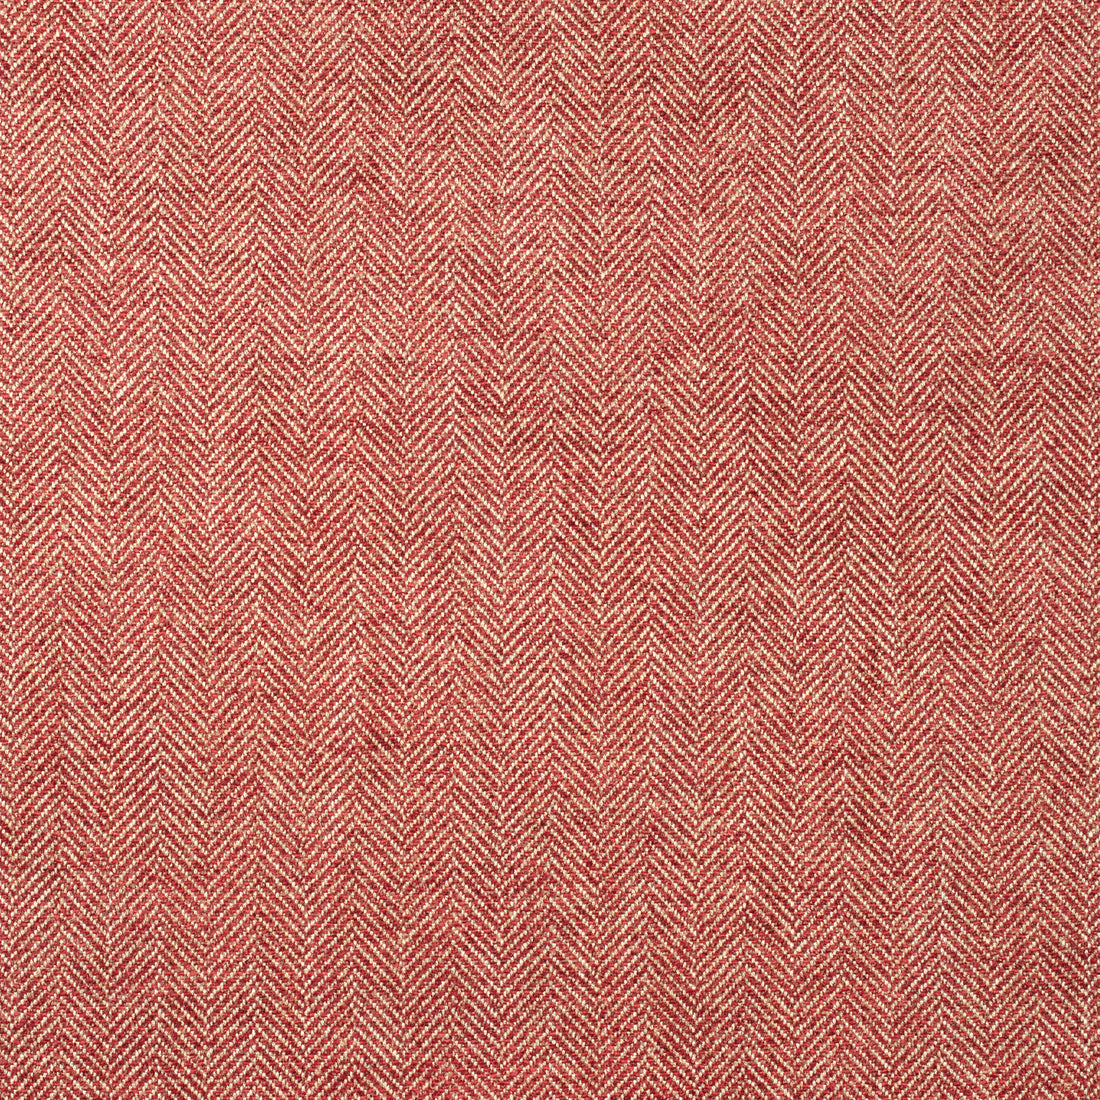 Hadrian Herringbone fabric in cardinal color - pattern number W80714 - by Thibaut in the Woven Resource 11: Rialto collection